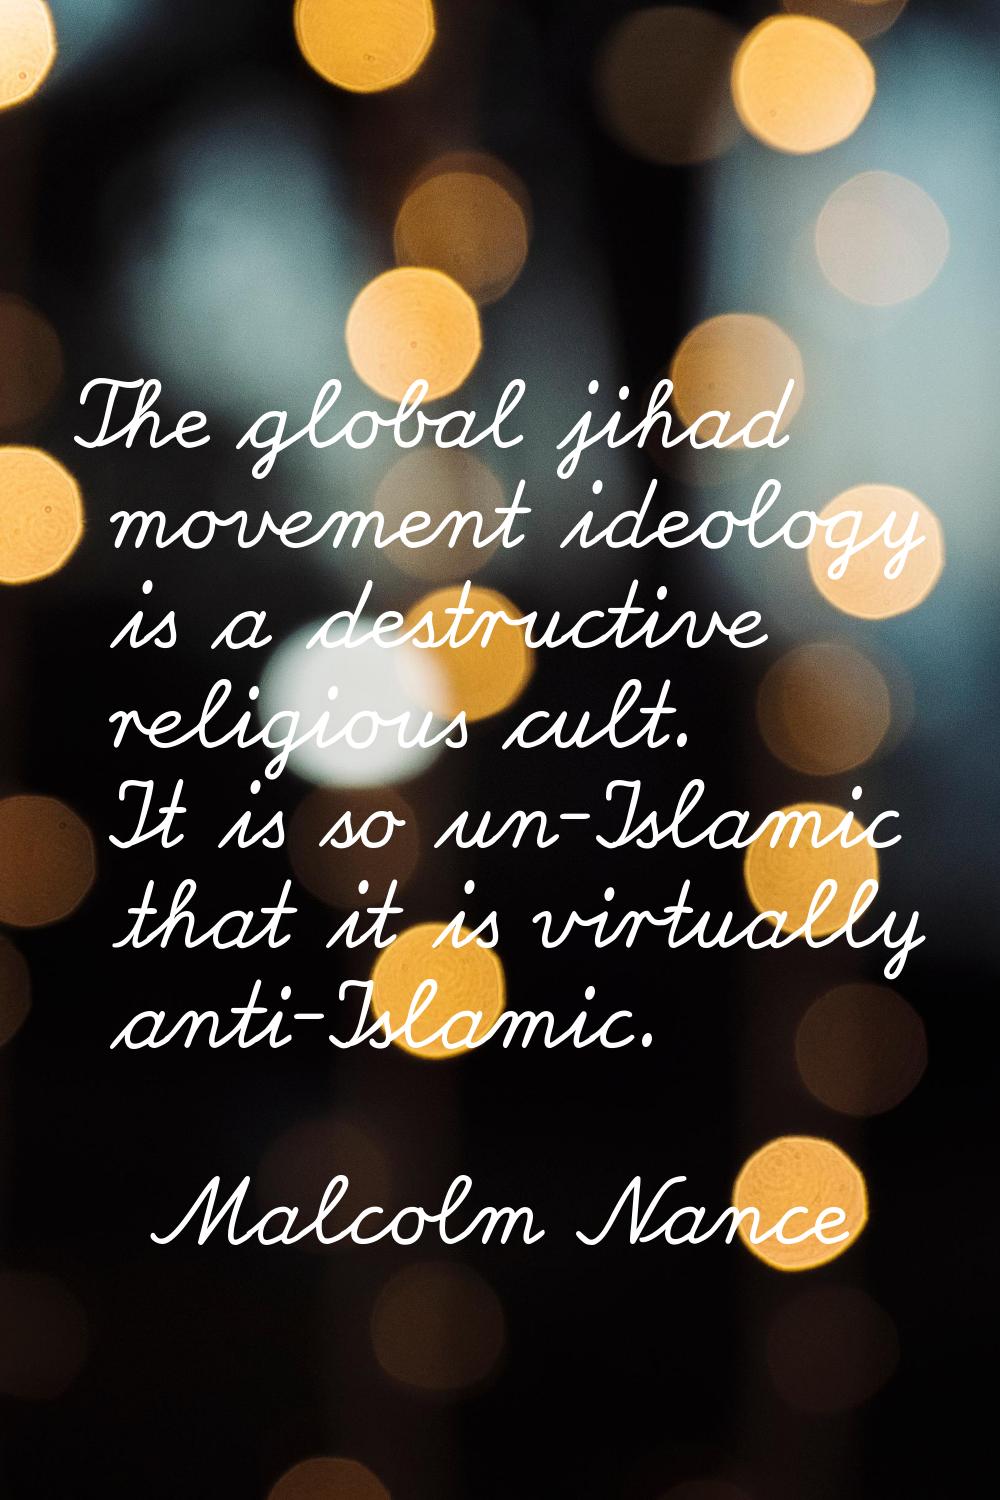 The global jihad movement ideology is a destructive religious cult. It is so un-Islamic that it is 